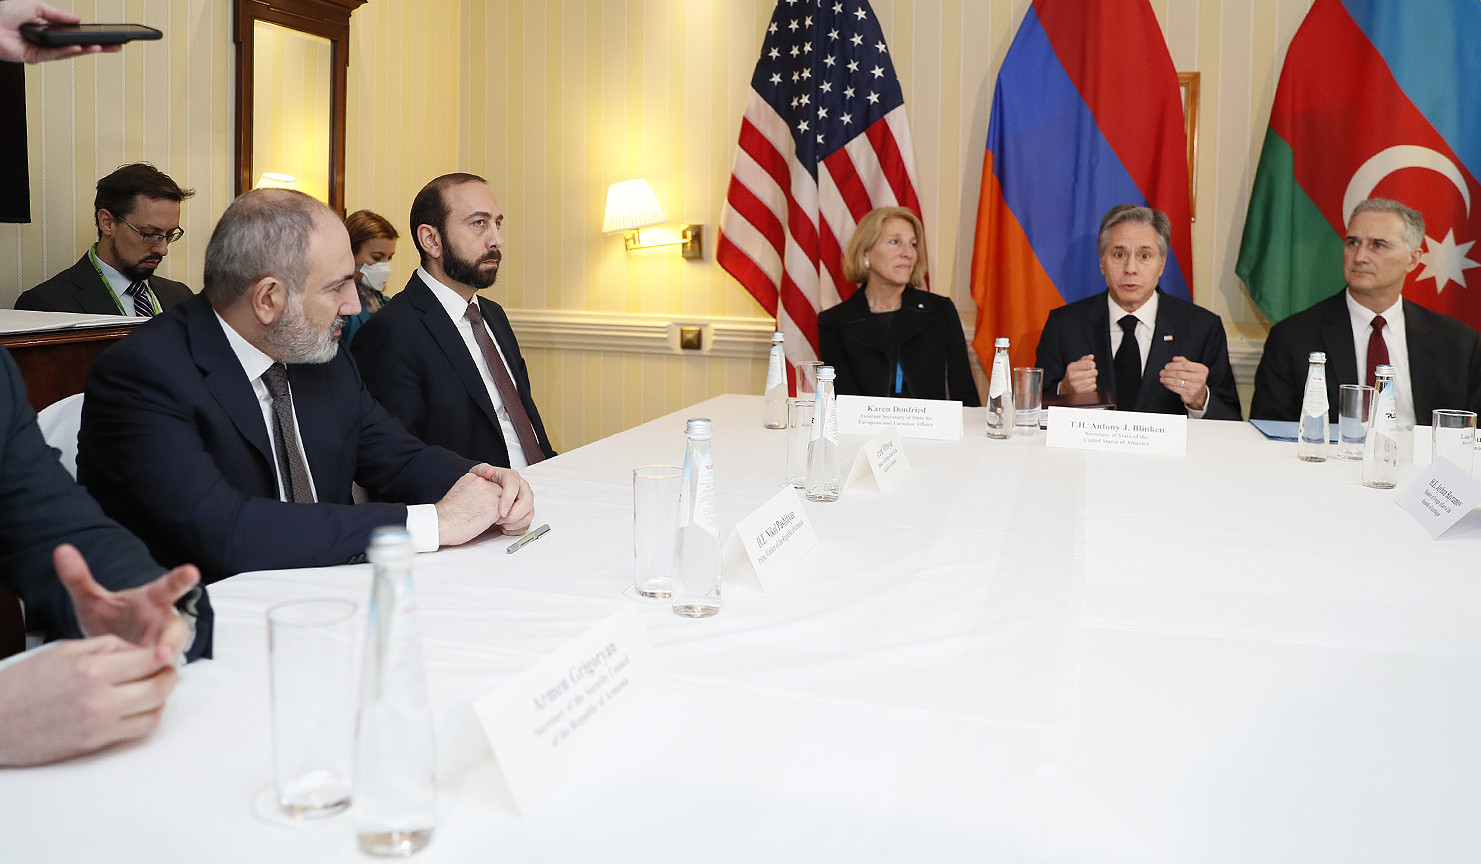 Meeting of Prime Minister of Armenia, US Secretary of State and President of Azerbaijan took place in Munich